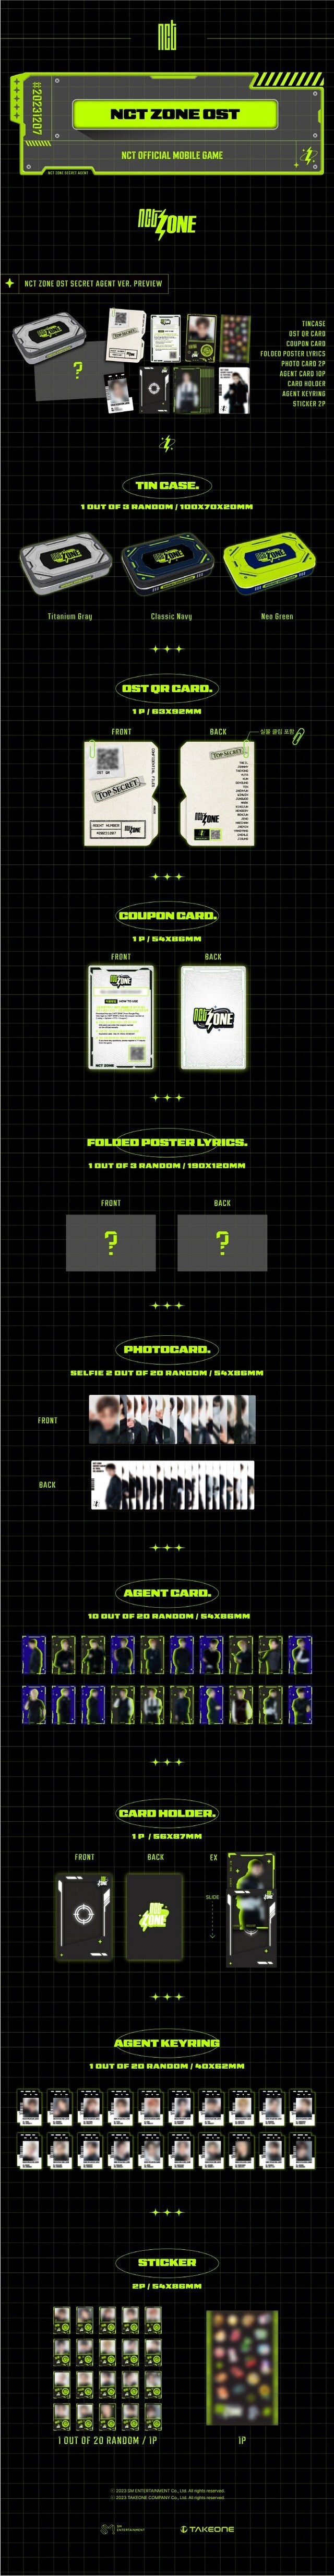 [PREORDER] NCT - NCT ZONE OST [DO IT (LET'S PLAY)] (TIN CASE VER.)